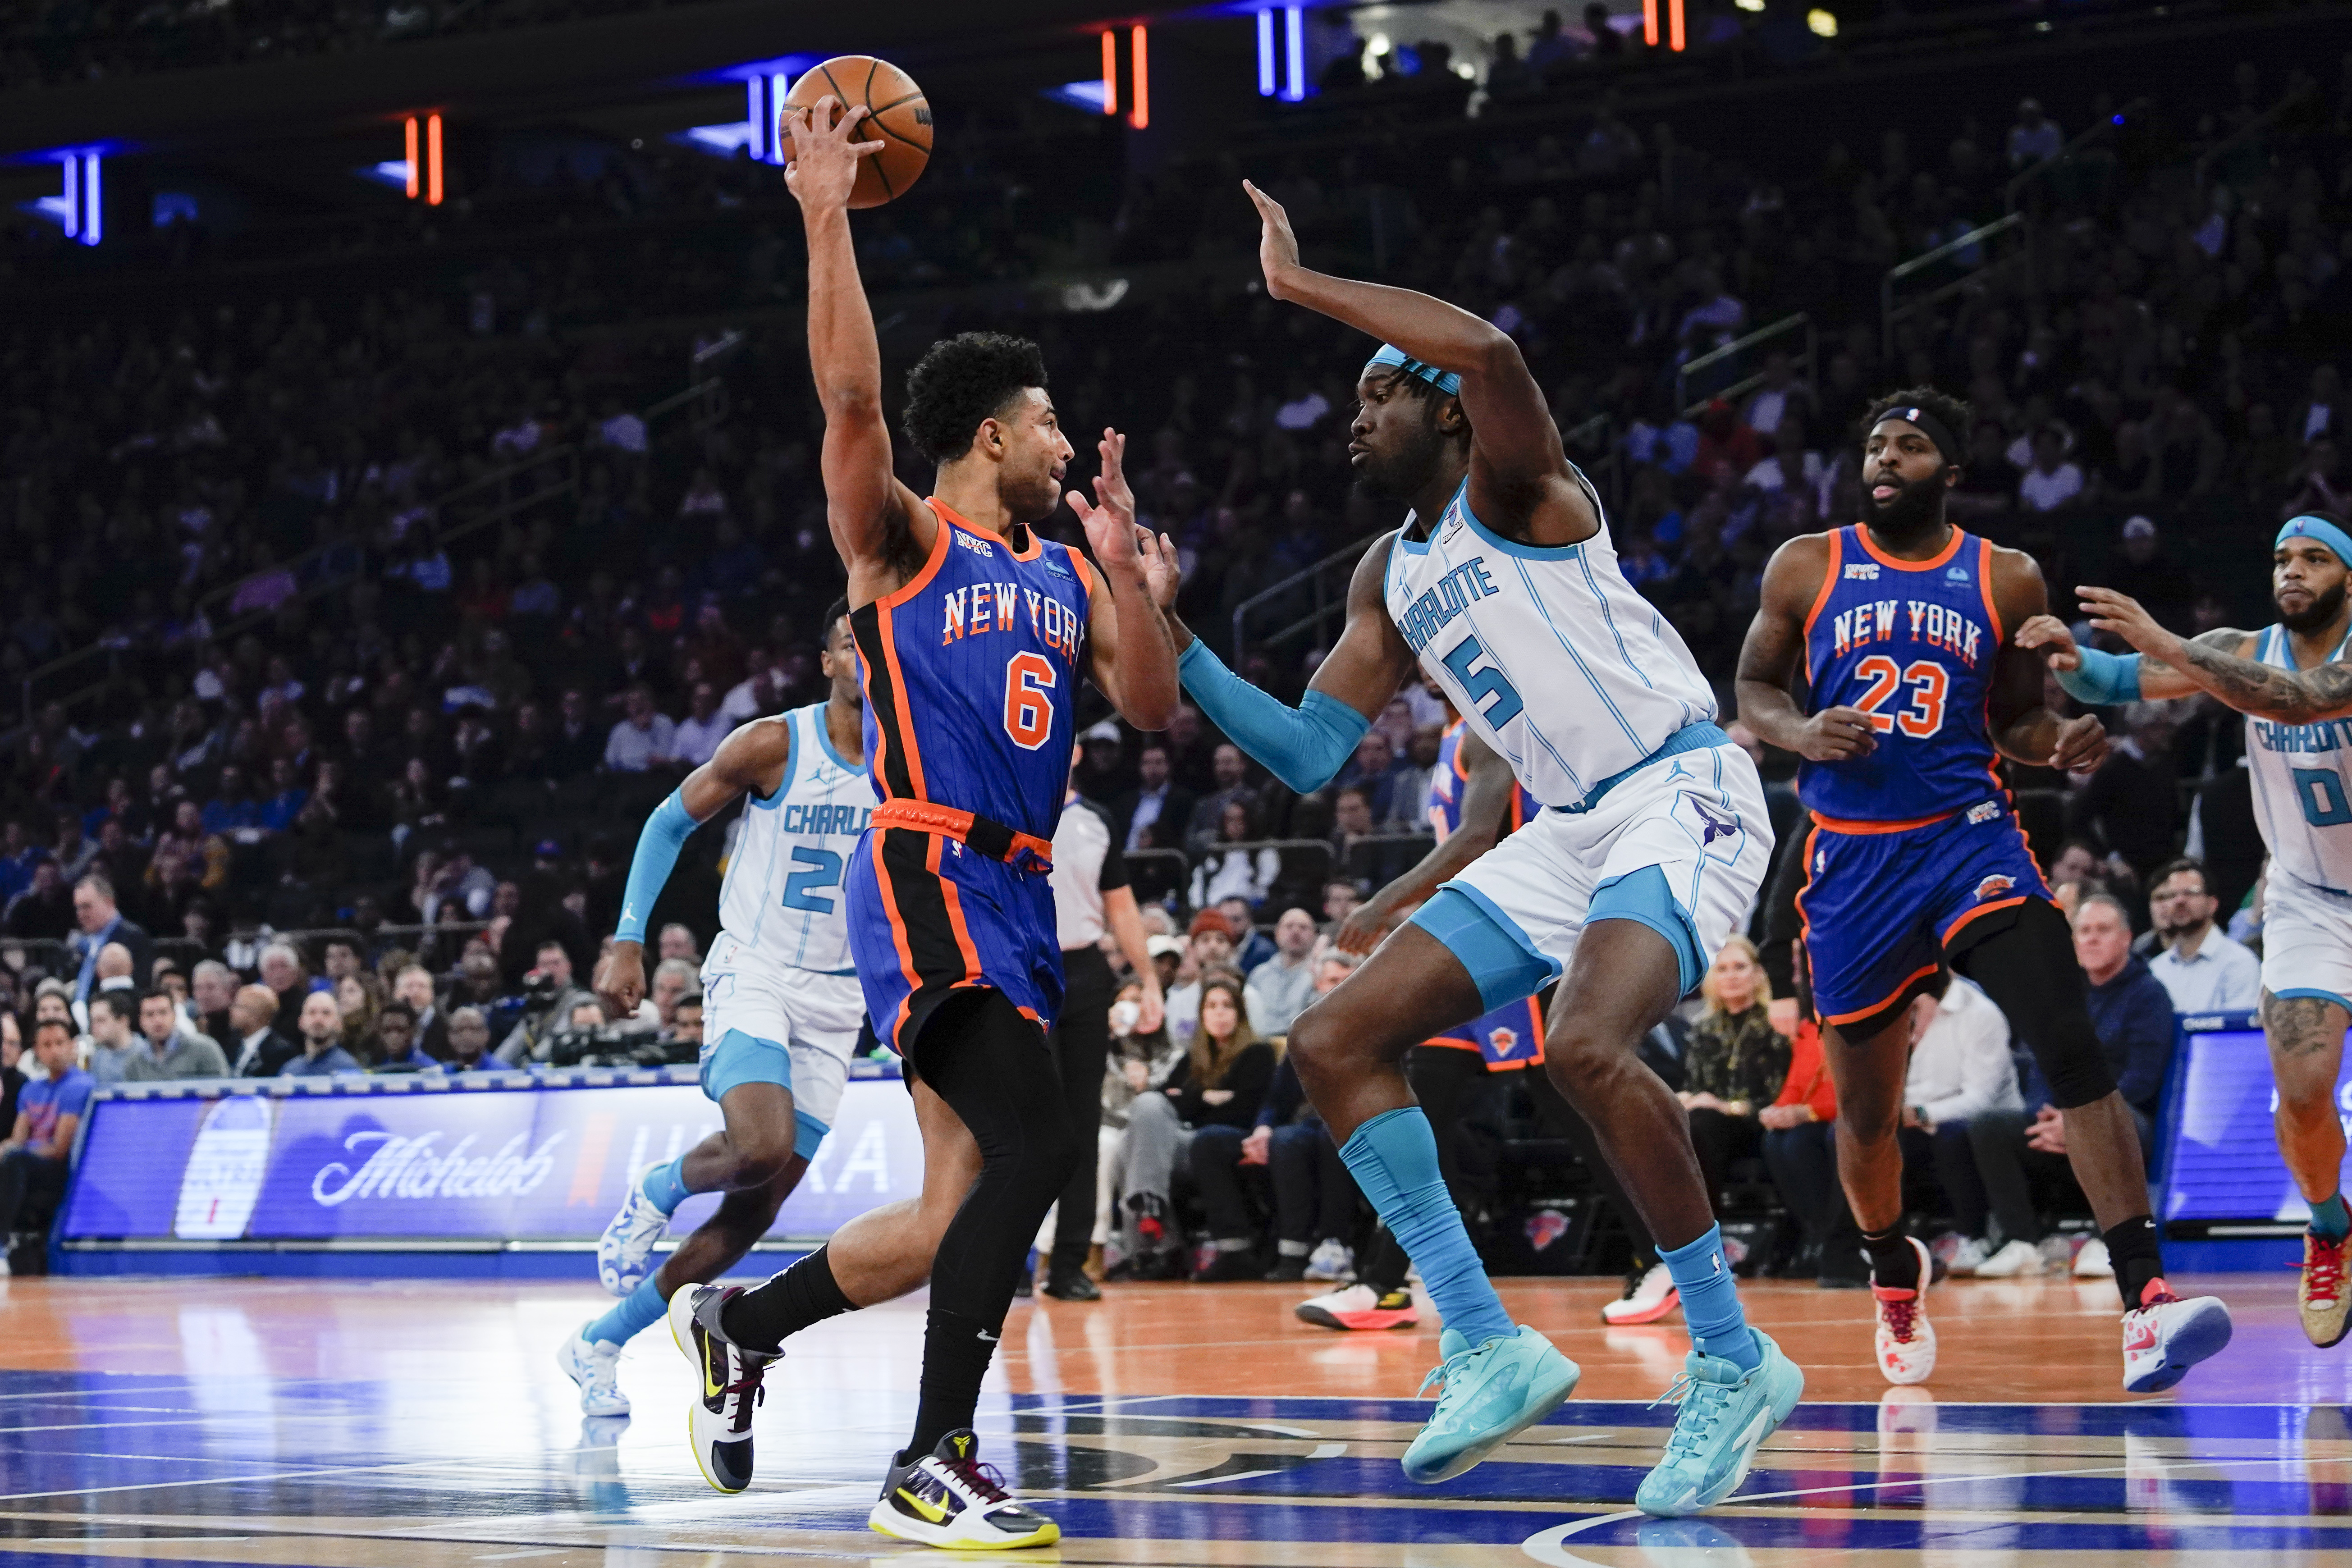 Knicks clobber Hornets, advance to in-season tournament knockout round